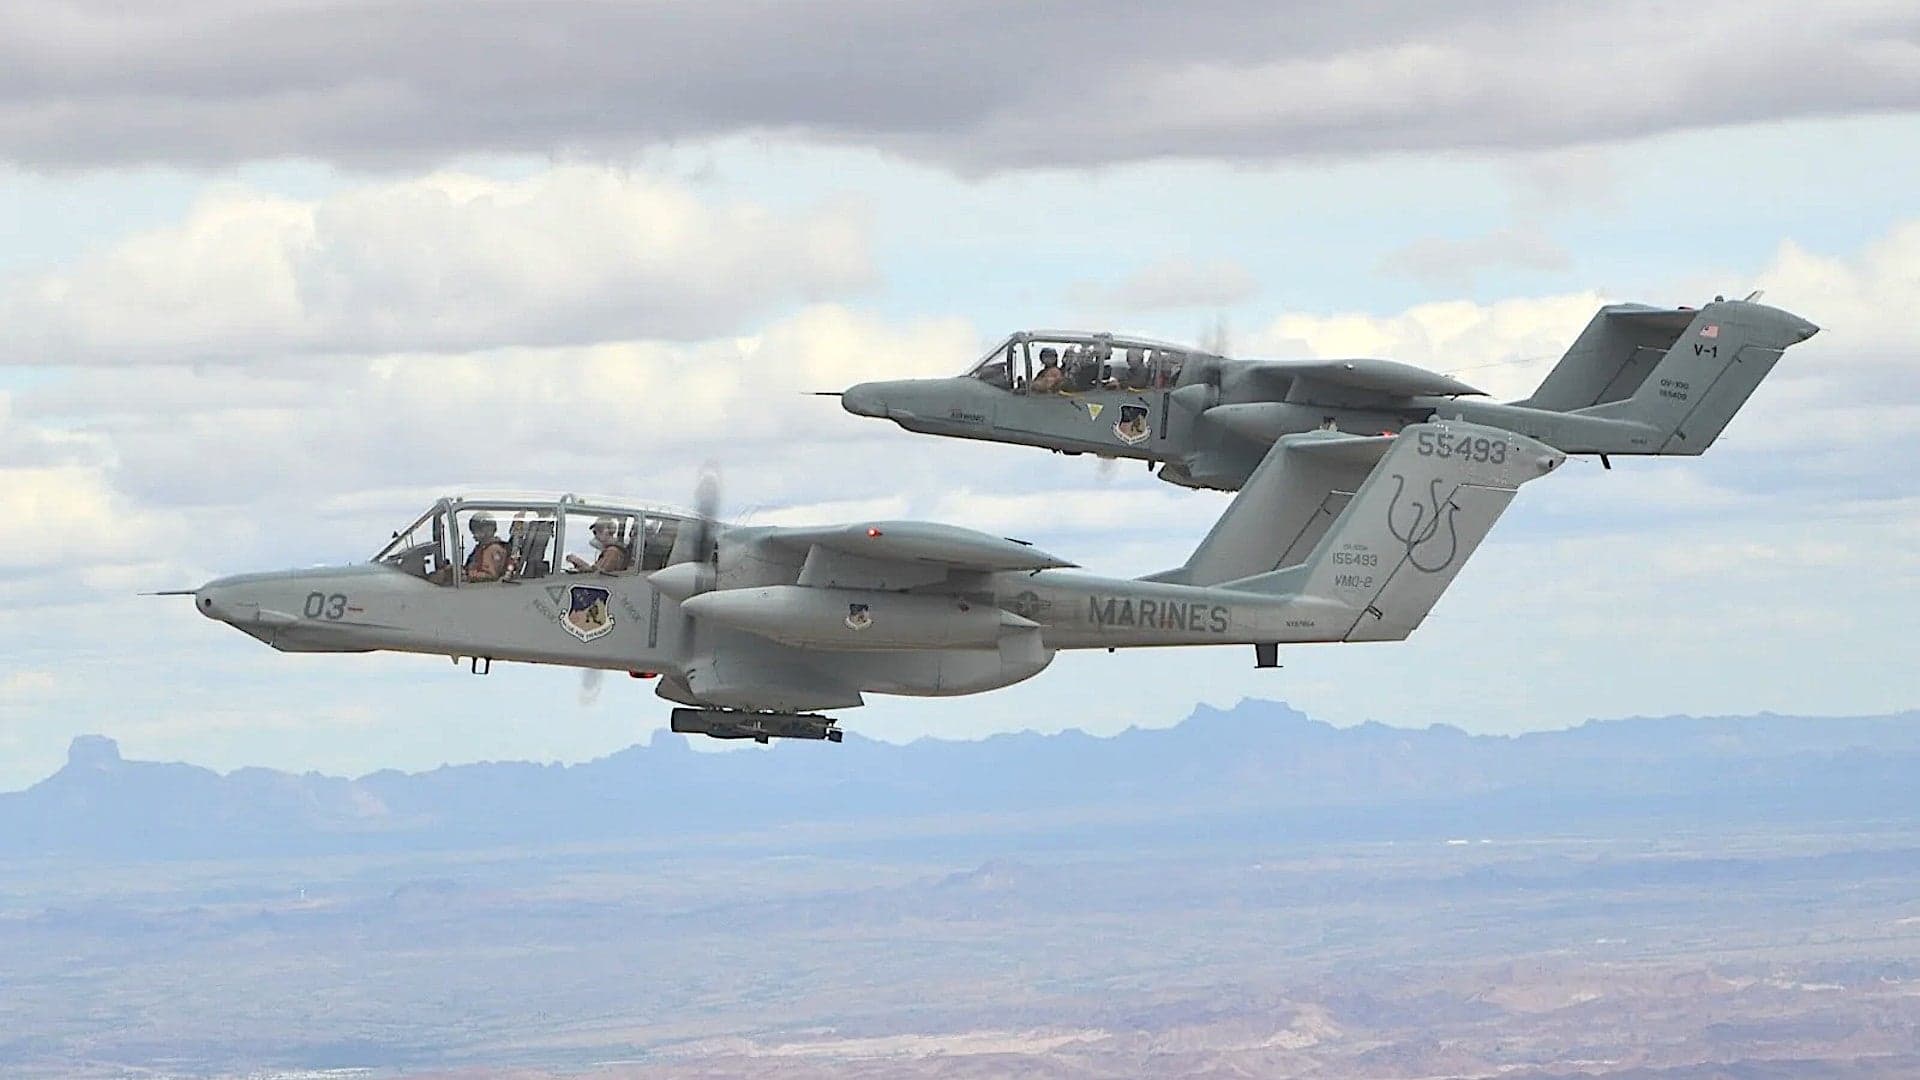 The Bronco Is Back! A Fleet Of OV-10s Will Help Train Air Force Forward Air Controllers